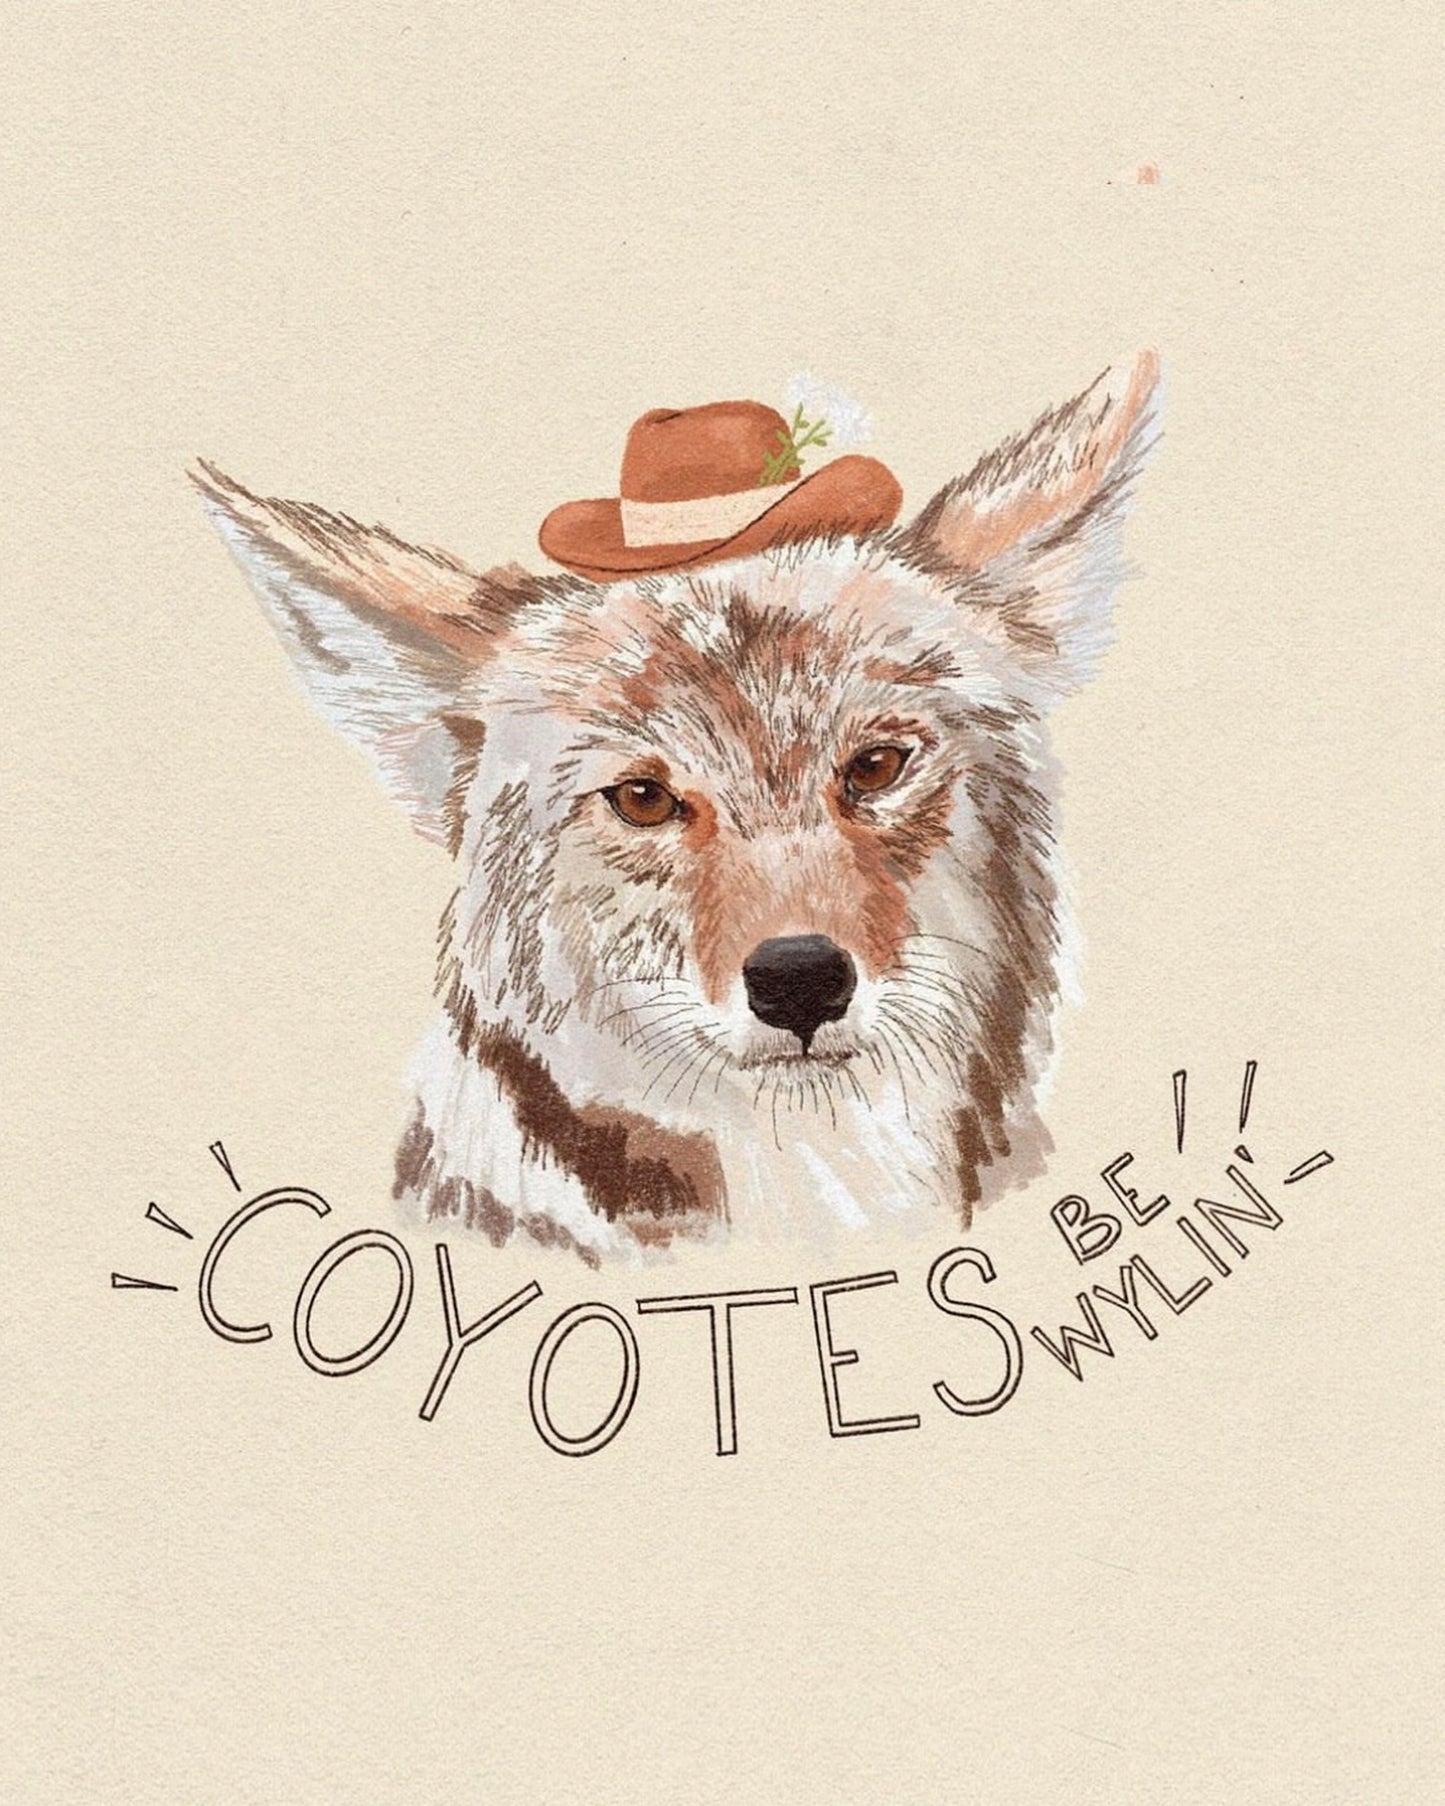 Coyotes Be Wylin' Print